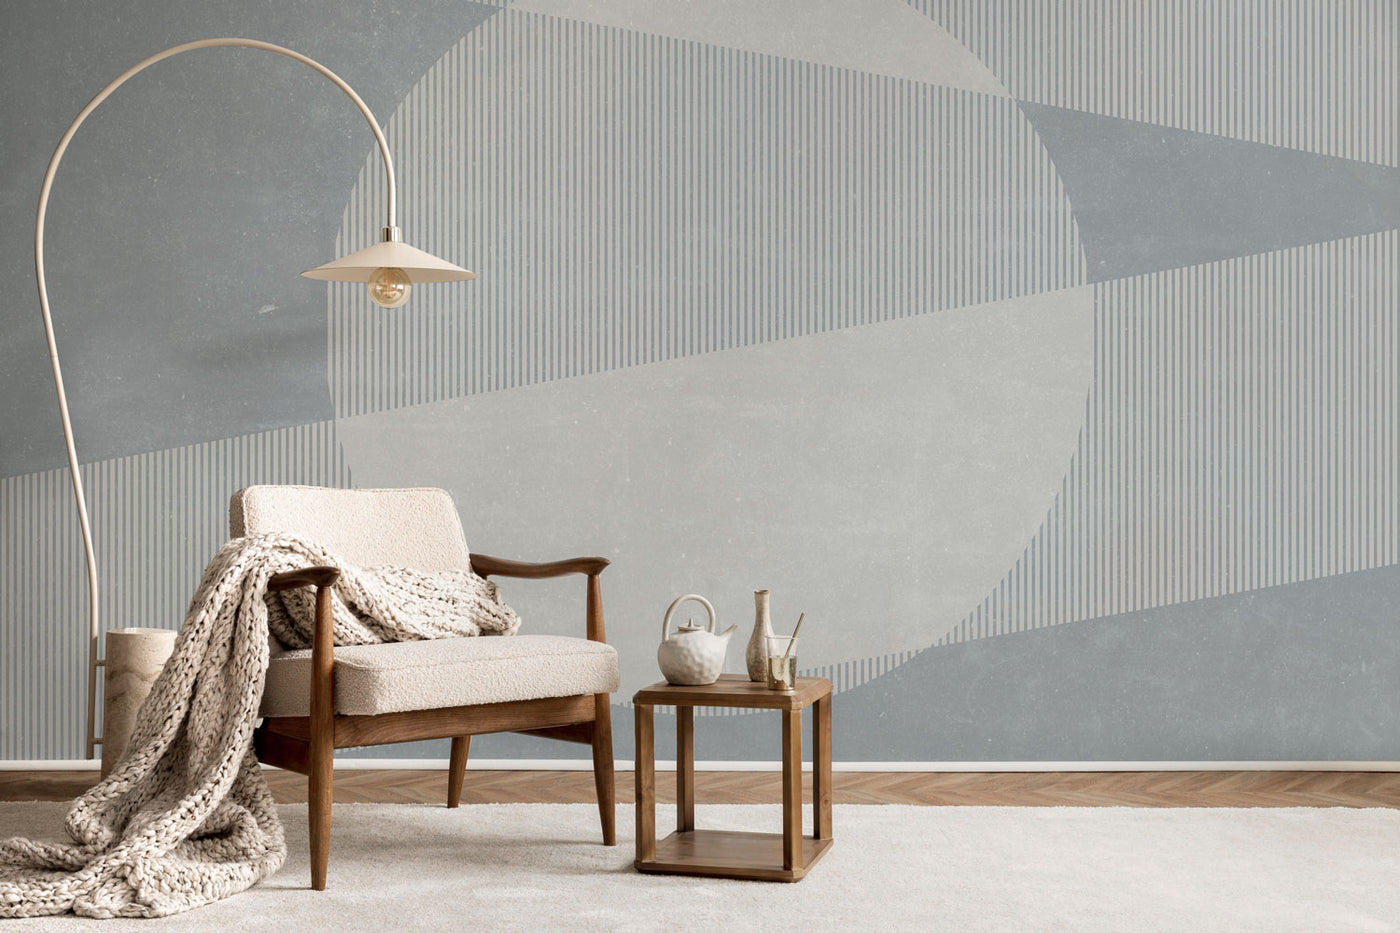 Abstract Geometric Shapes Wall Mural